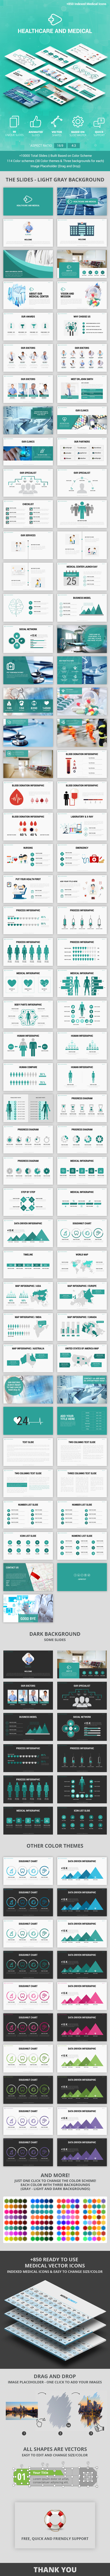 Healthcare and Medical - PowerPoint Presentation Template